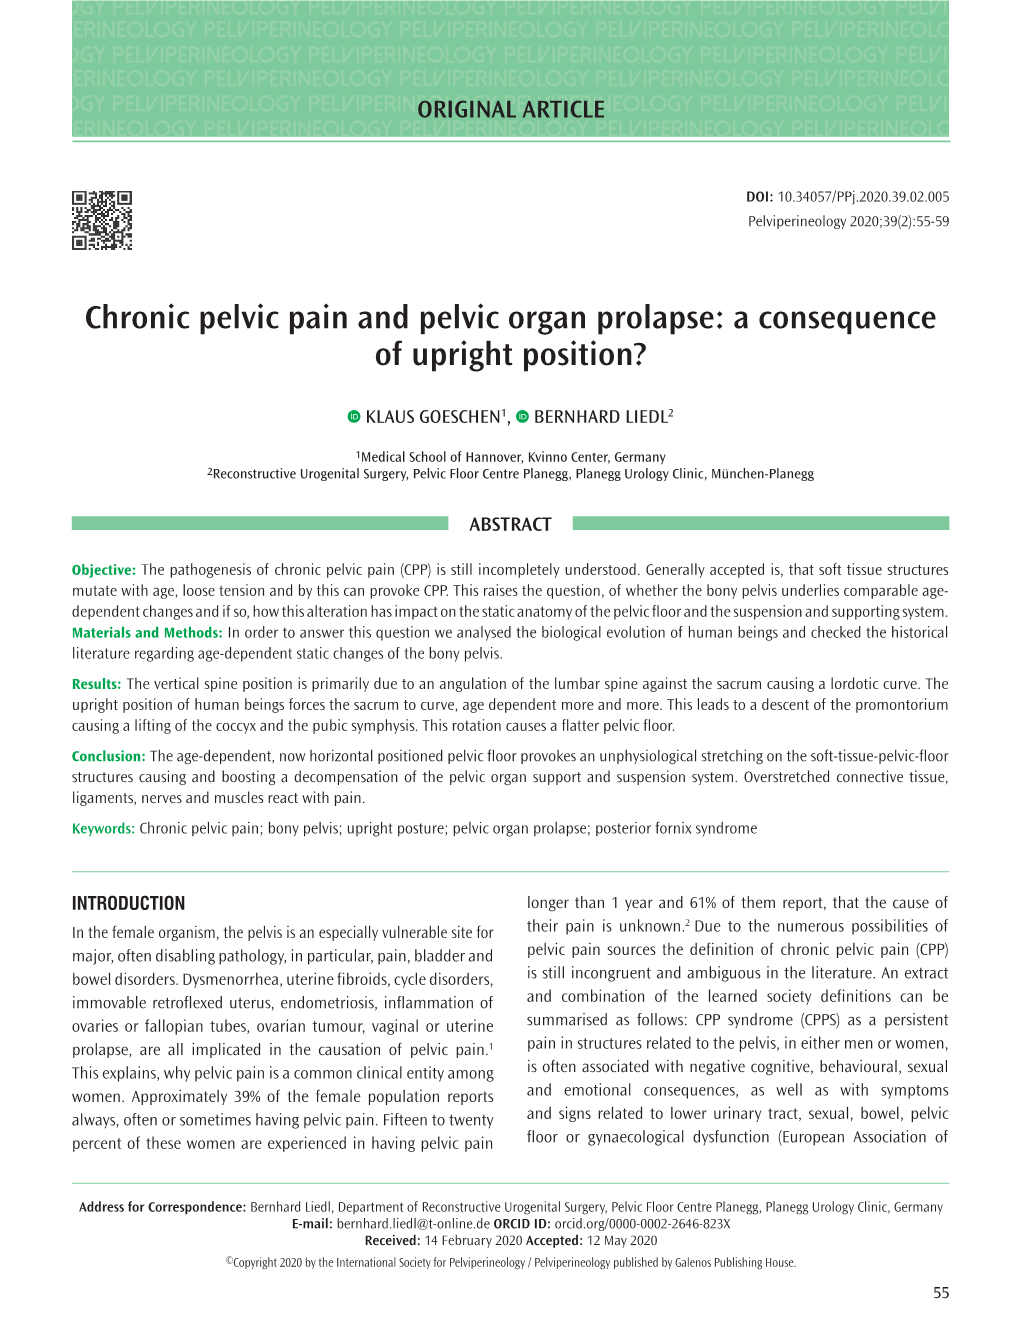 Chronic Pelvic Pain and Pelvic Organ Prolapse: a Consequence of Upright Position?